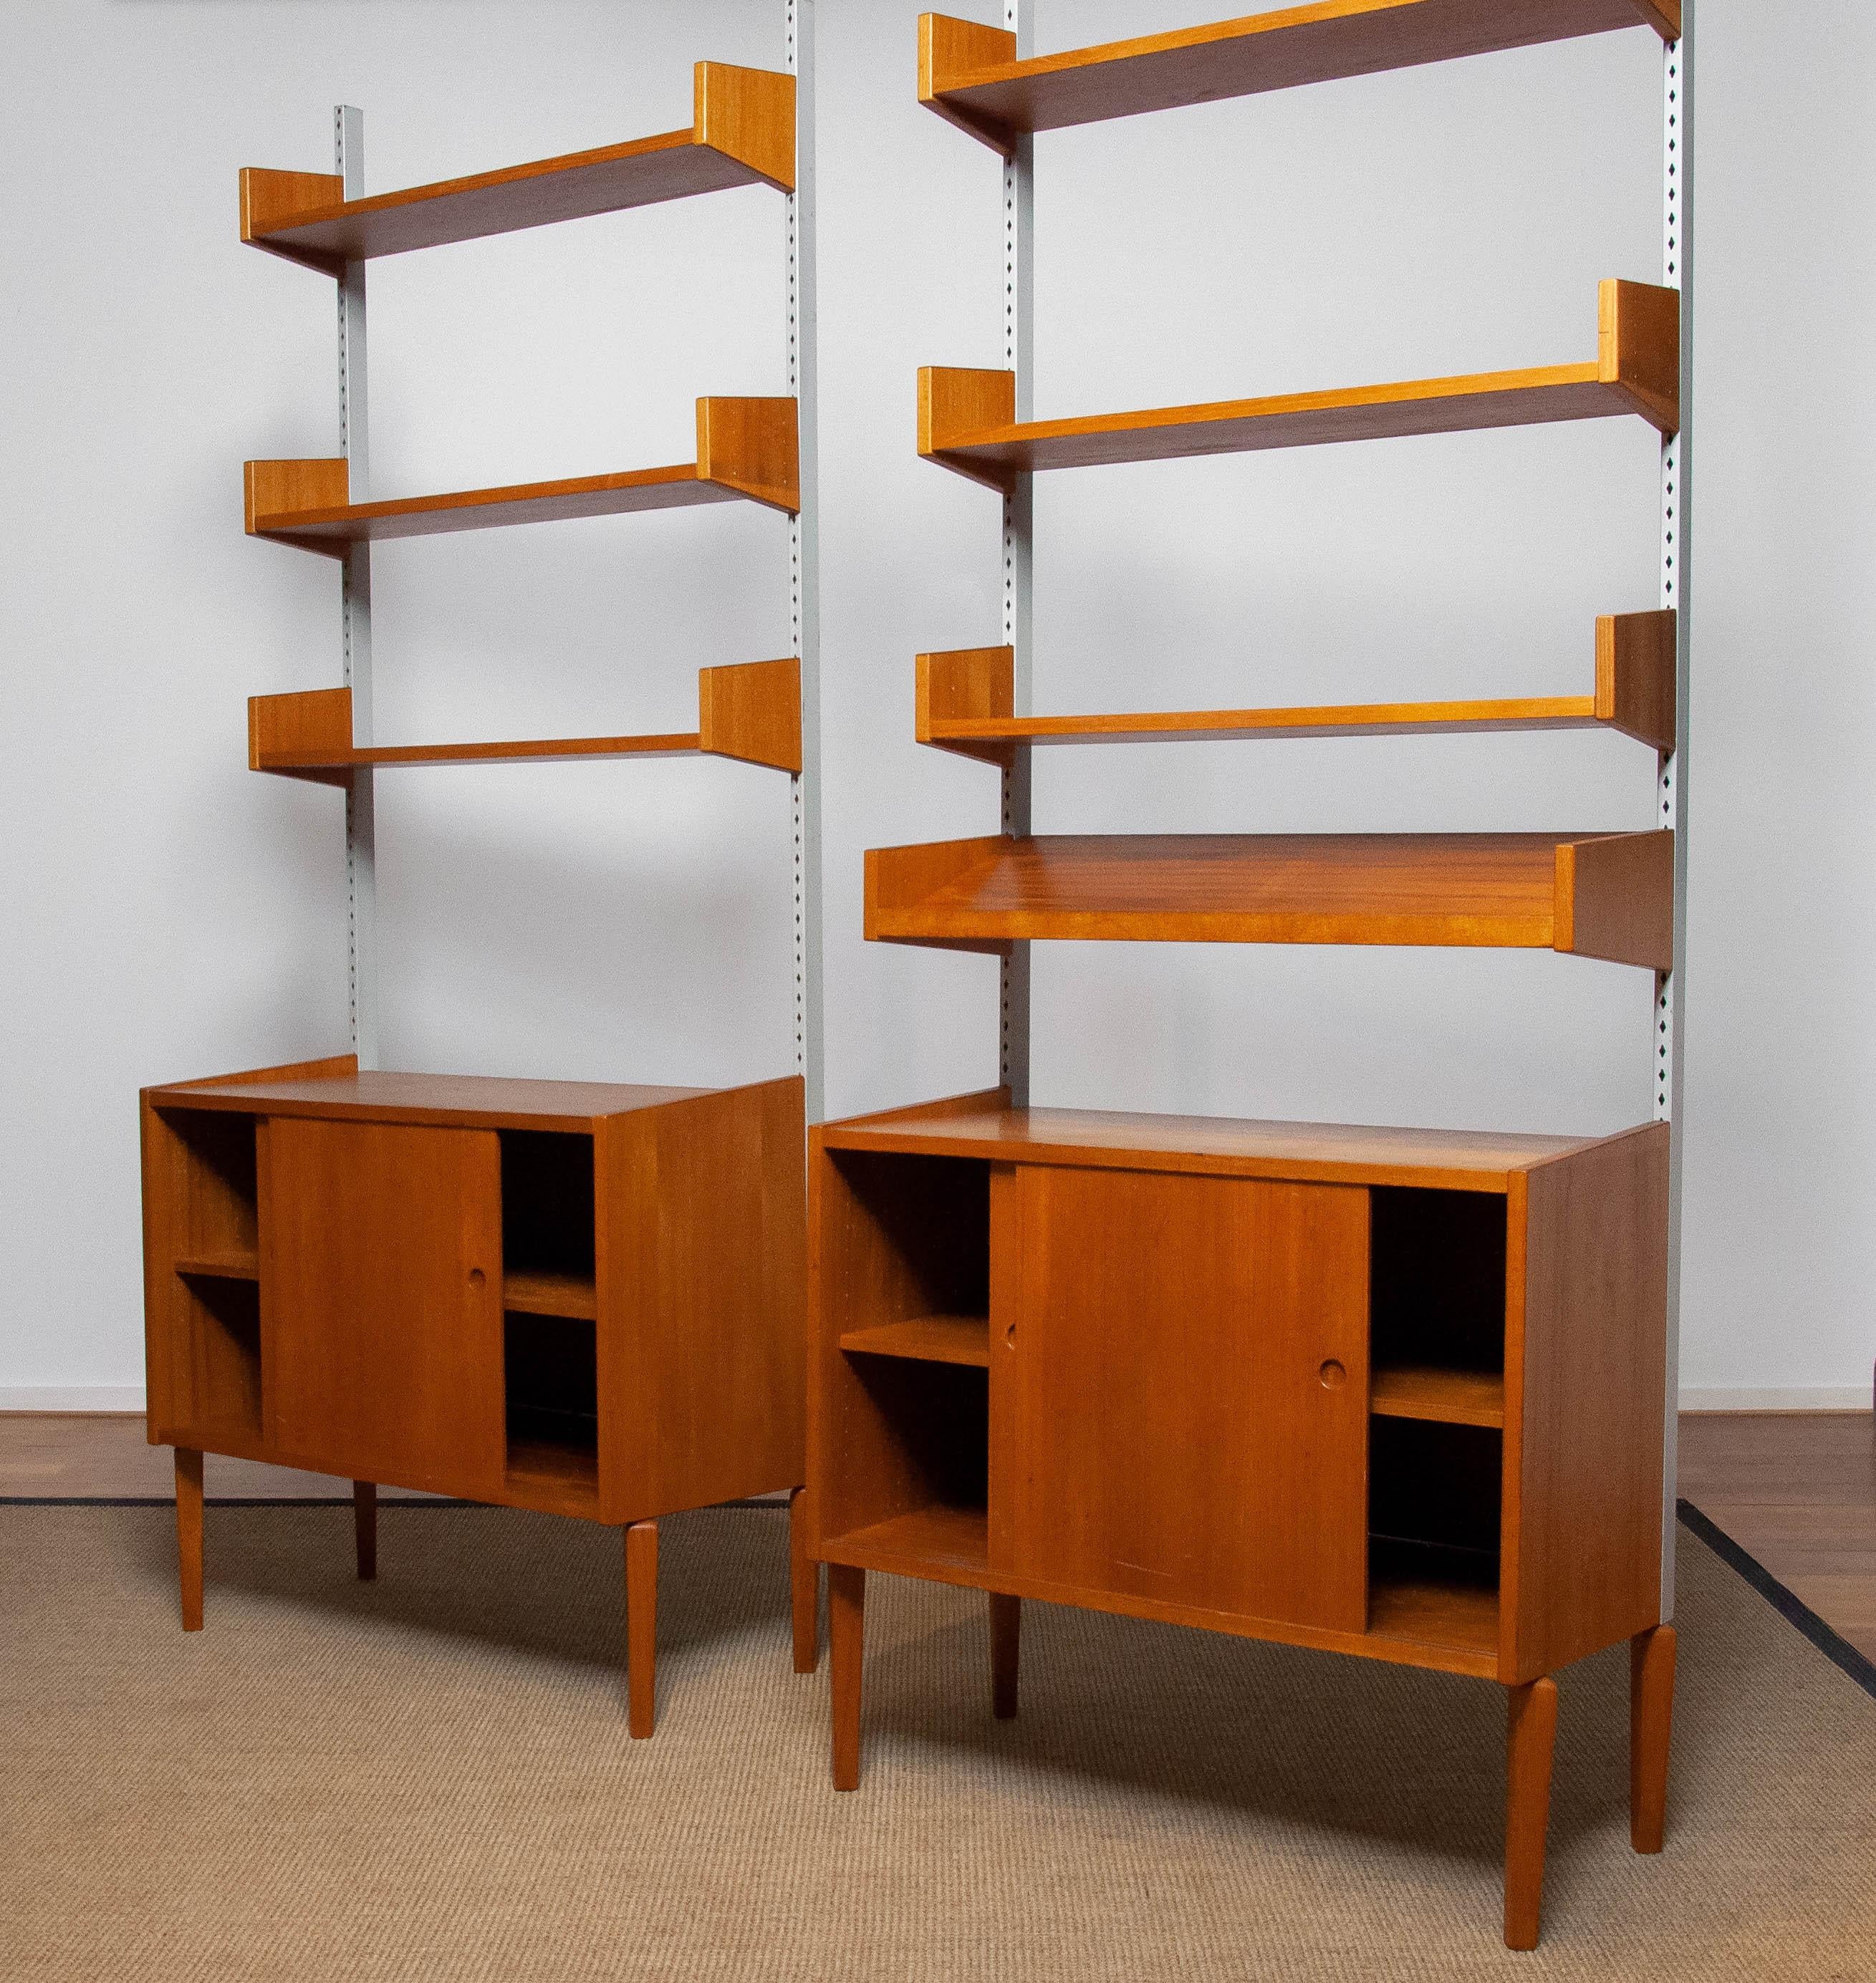 Mid-20th Century Pair Teak Shelf Systems Bookcases with Steel Bars by Harald Lundqvist for Lizzy